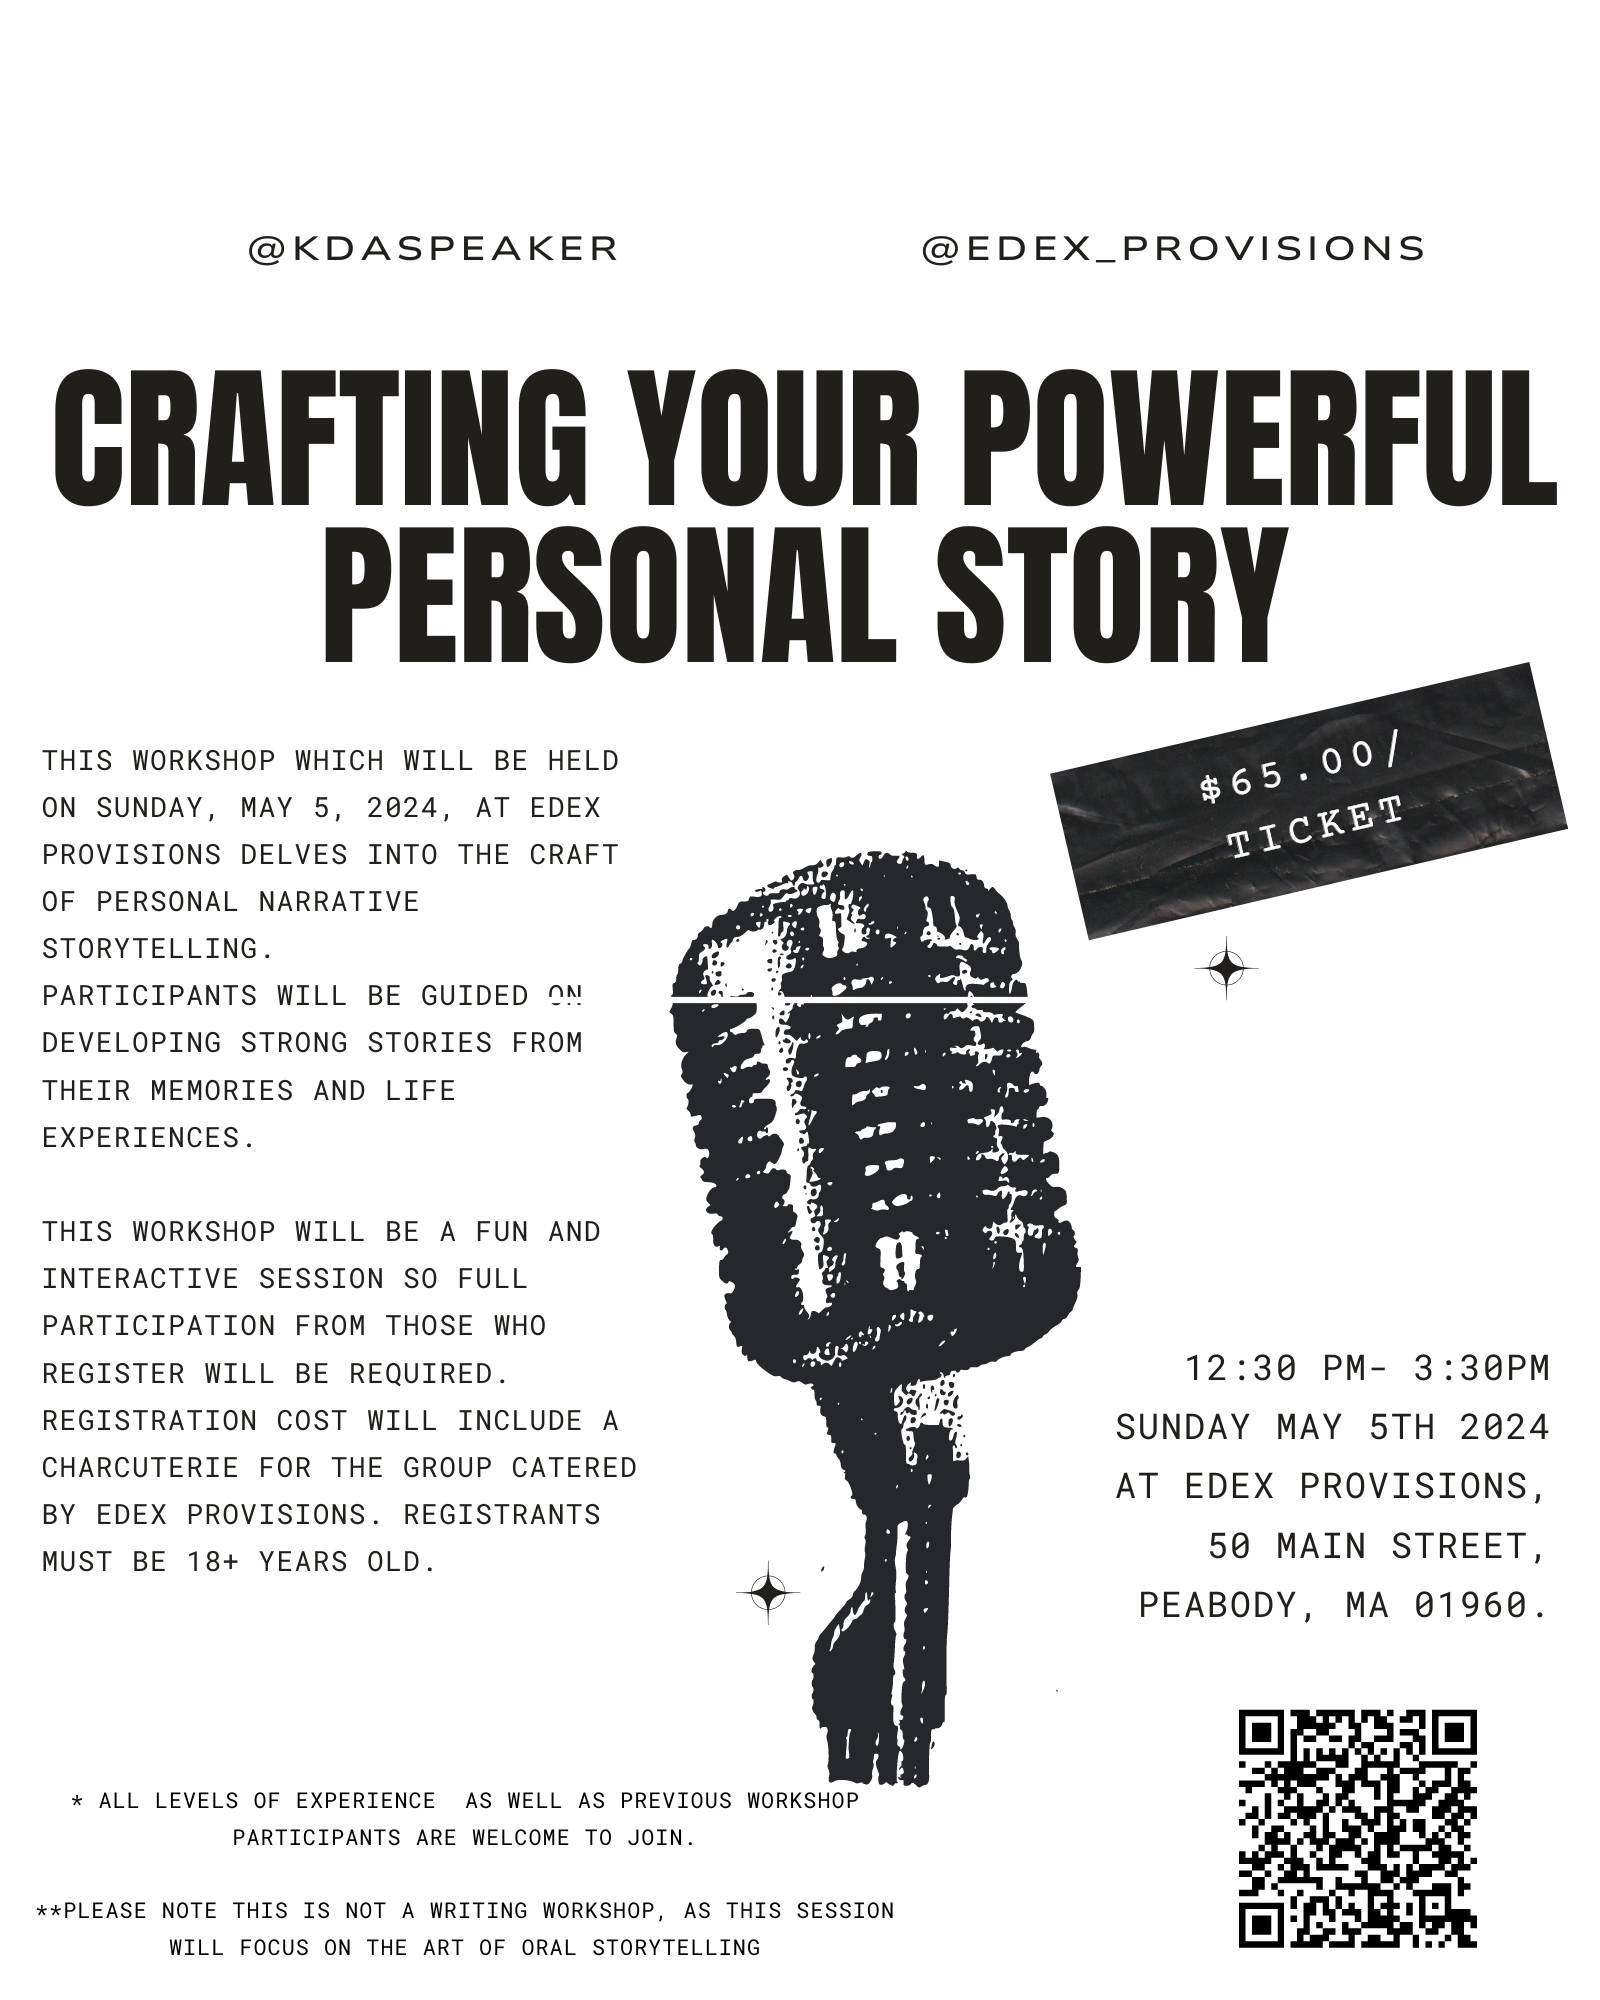 Join our workshop "Creating Your Unique Life's Narrative" on May 5, 2024. Taking place in Peabody, Massachusetts from 12:30 pm to 3:30 pm. This event not only focuses on helping you create a compelling personal narrative but also fosters a community of storytellers just like you. Relevant information along with the QR code for ticket purchase is clearly showcased on our event poster. Don't miss this opportunity to shape your story and make your voice heard!